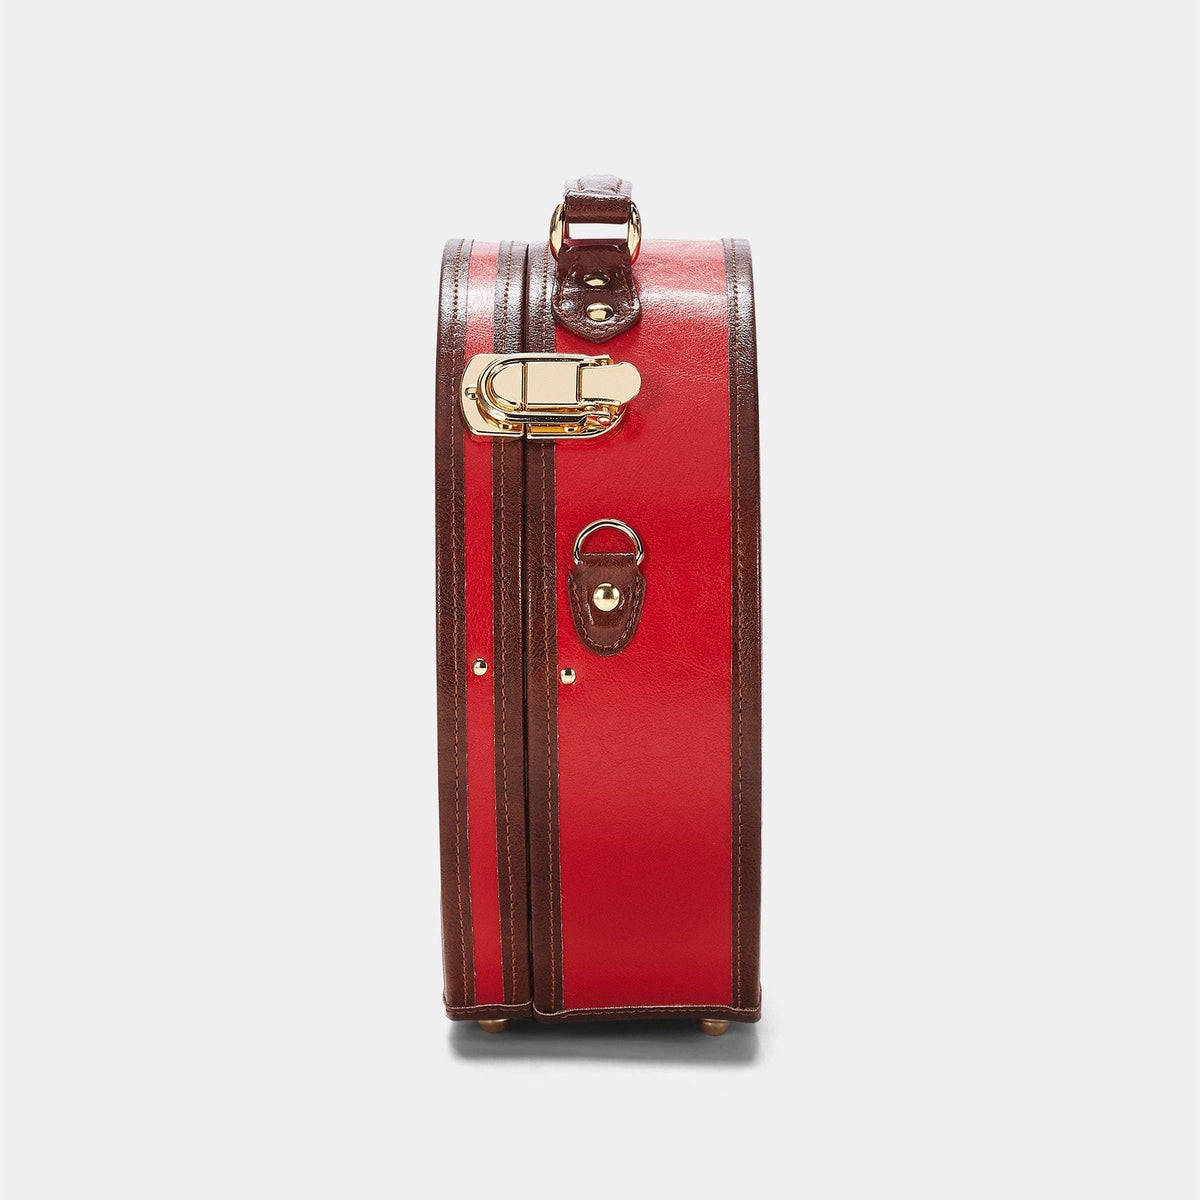 The Entrepreneur - Red Deluxe Hatbox Hatbox Deluxe Steamline Luggage 